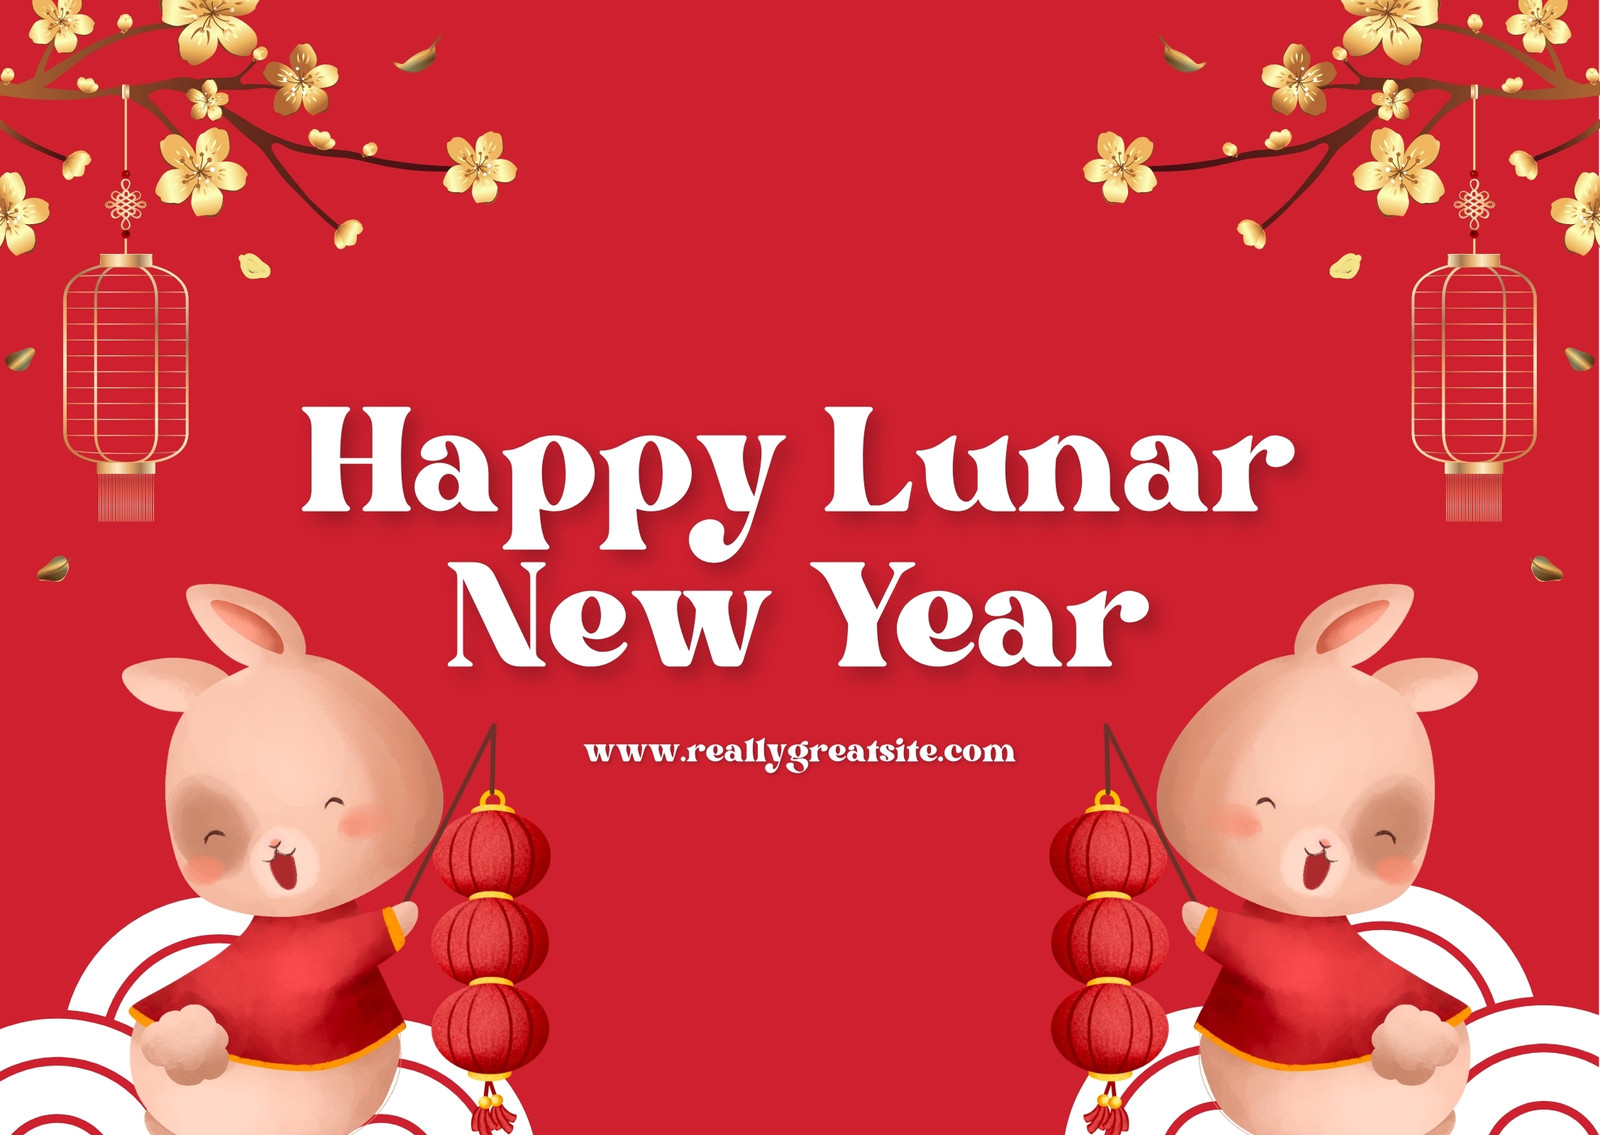 Free custom printable Chinese New Year card templates | Canva